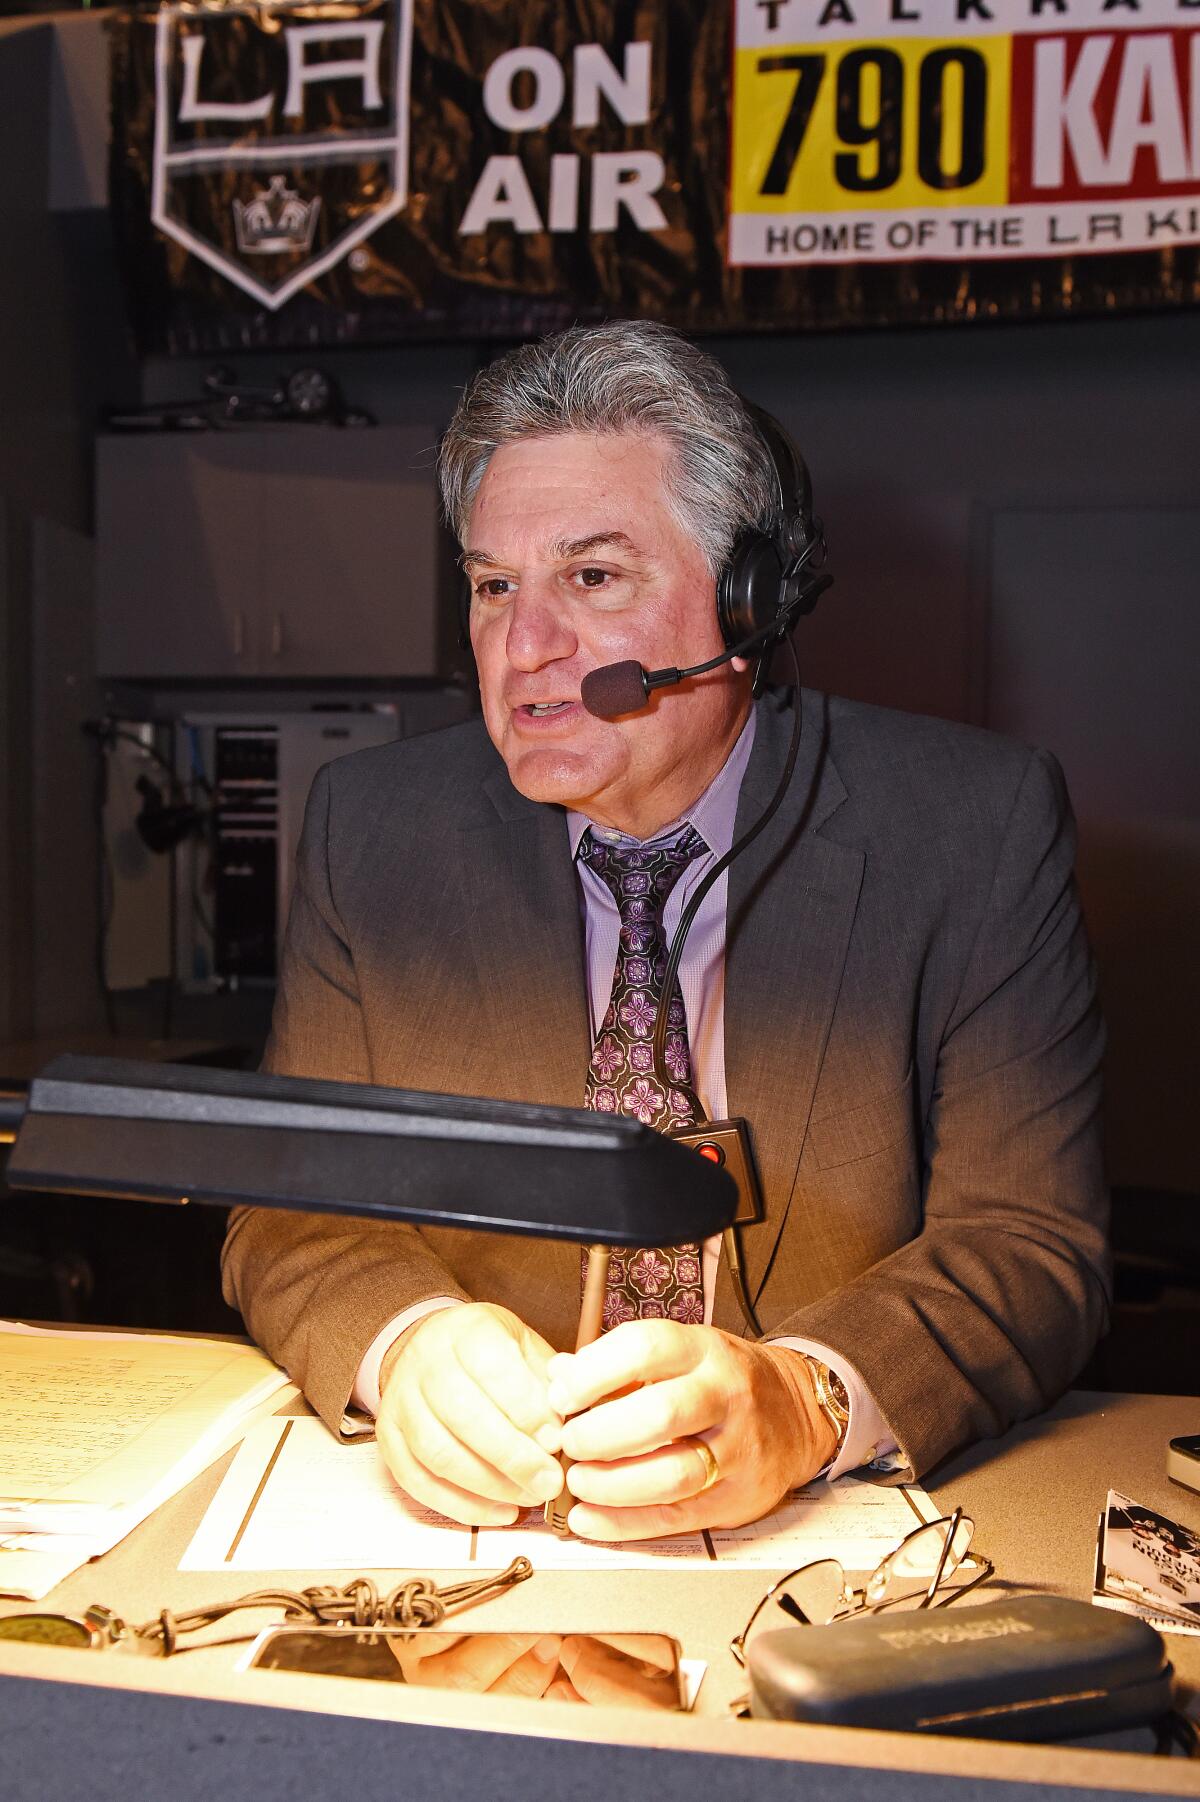 Nick Nickson broadcasts a game between the Kings and New York Islanders on Oct. 15, 2017 in Los Angeles.